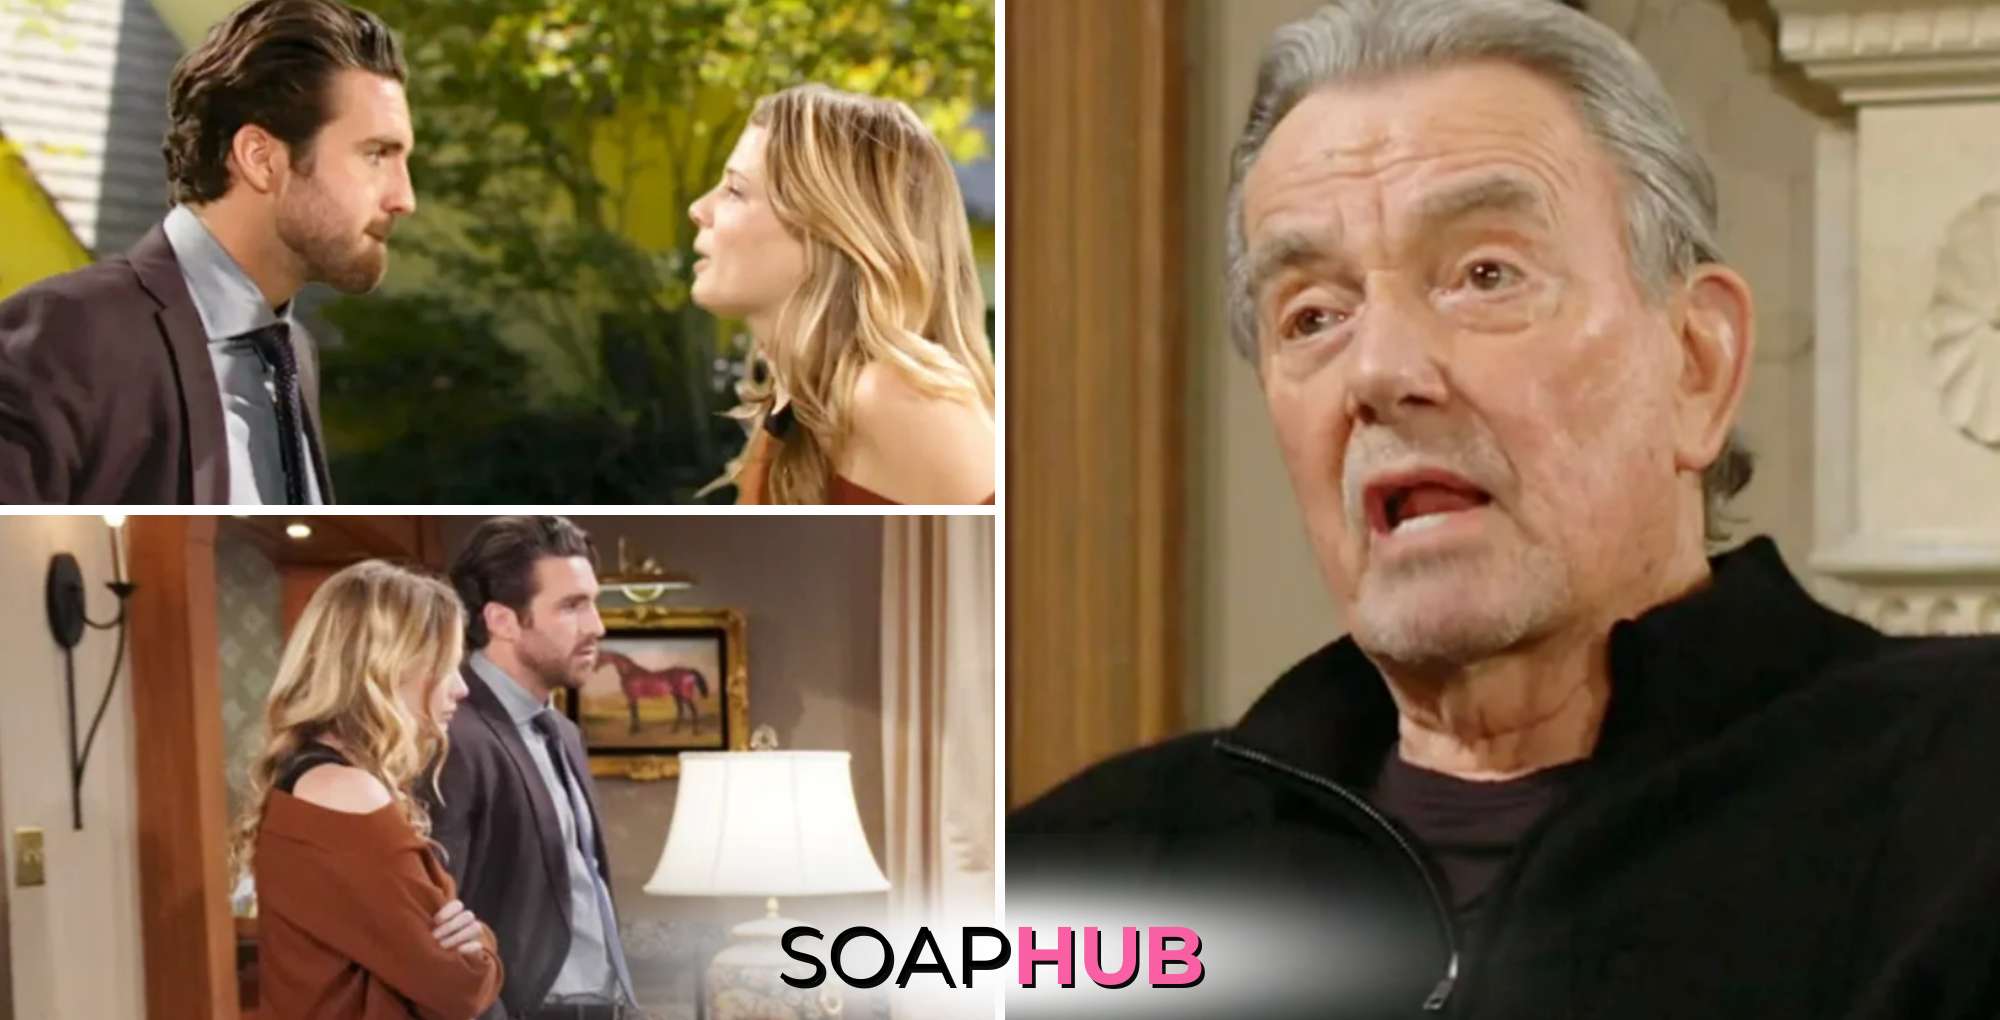 The Young and the Restless with Chance, Summer, and Victor and the Soap Hub logo.